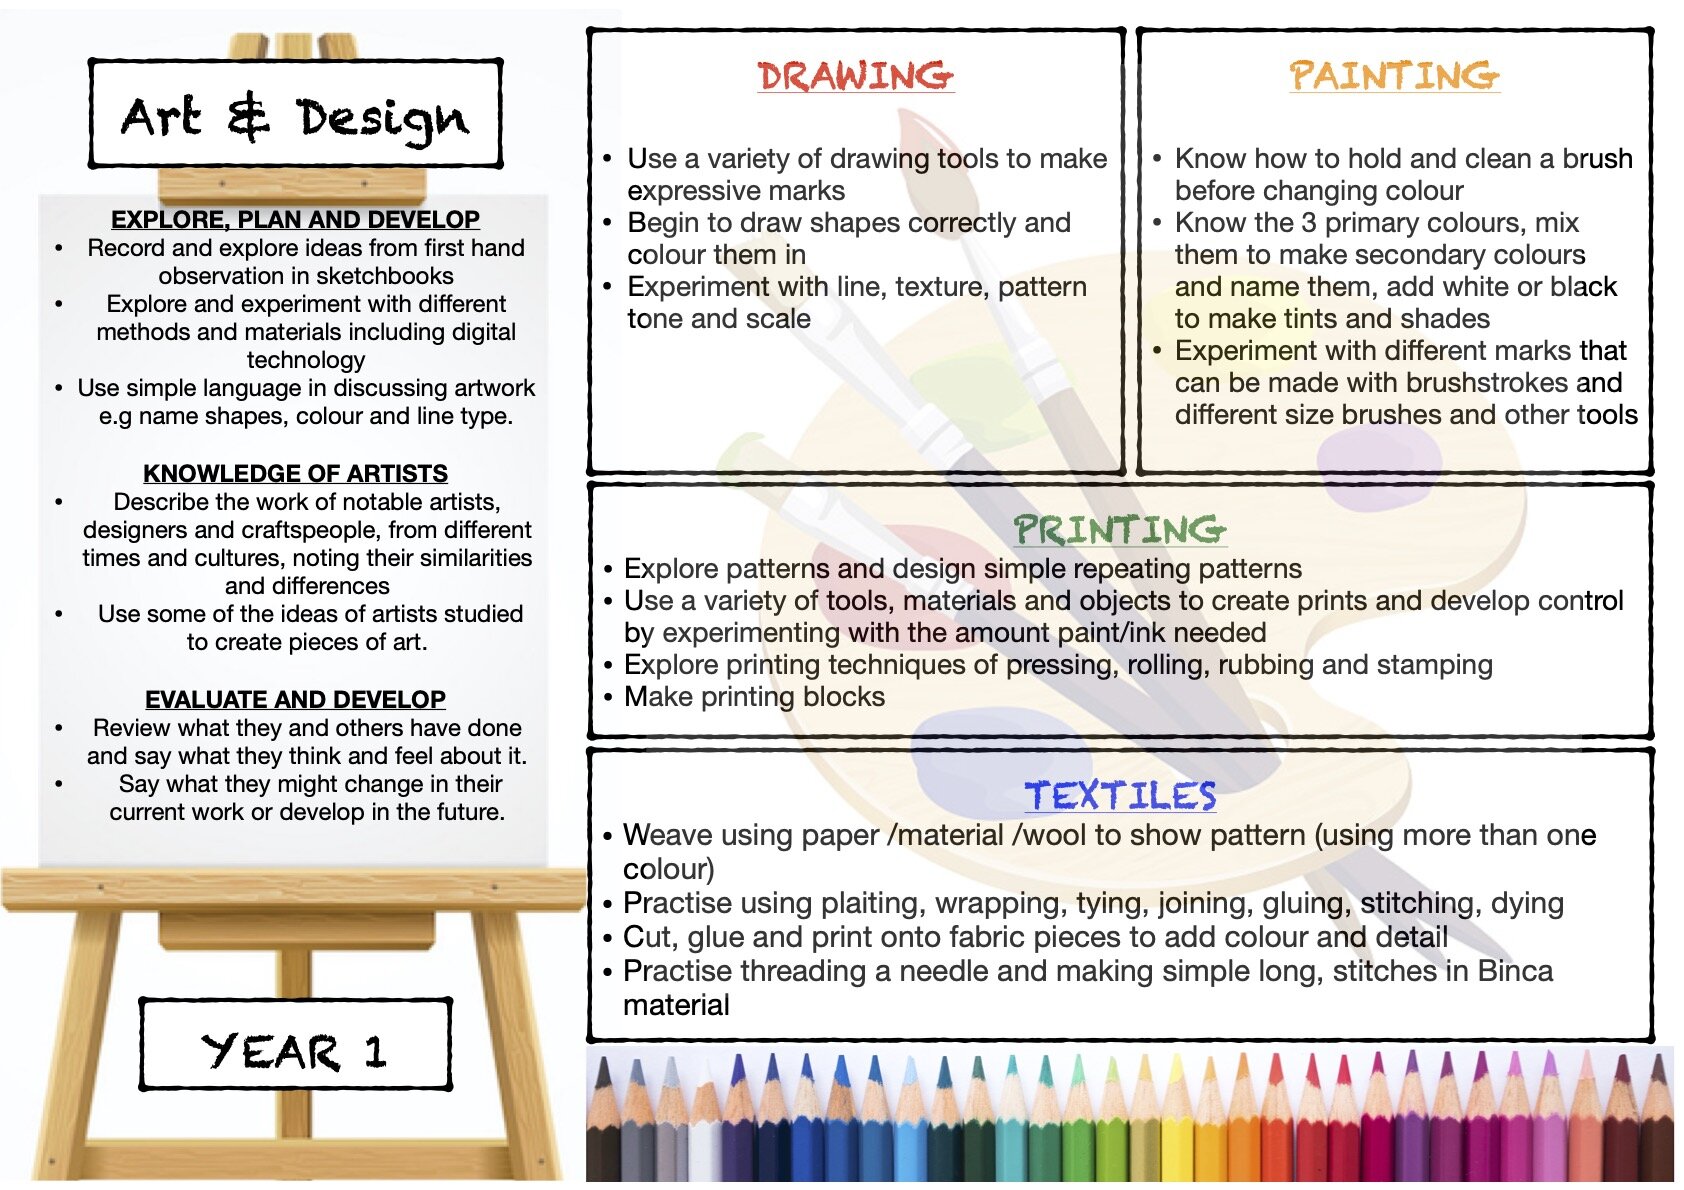 Art and Design Overview